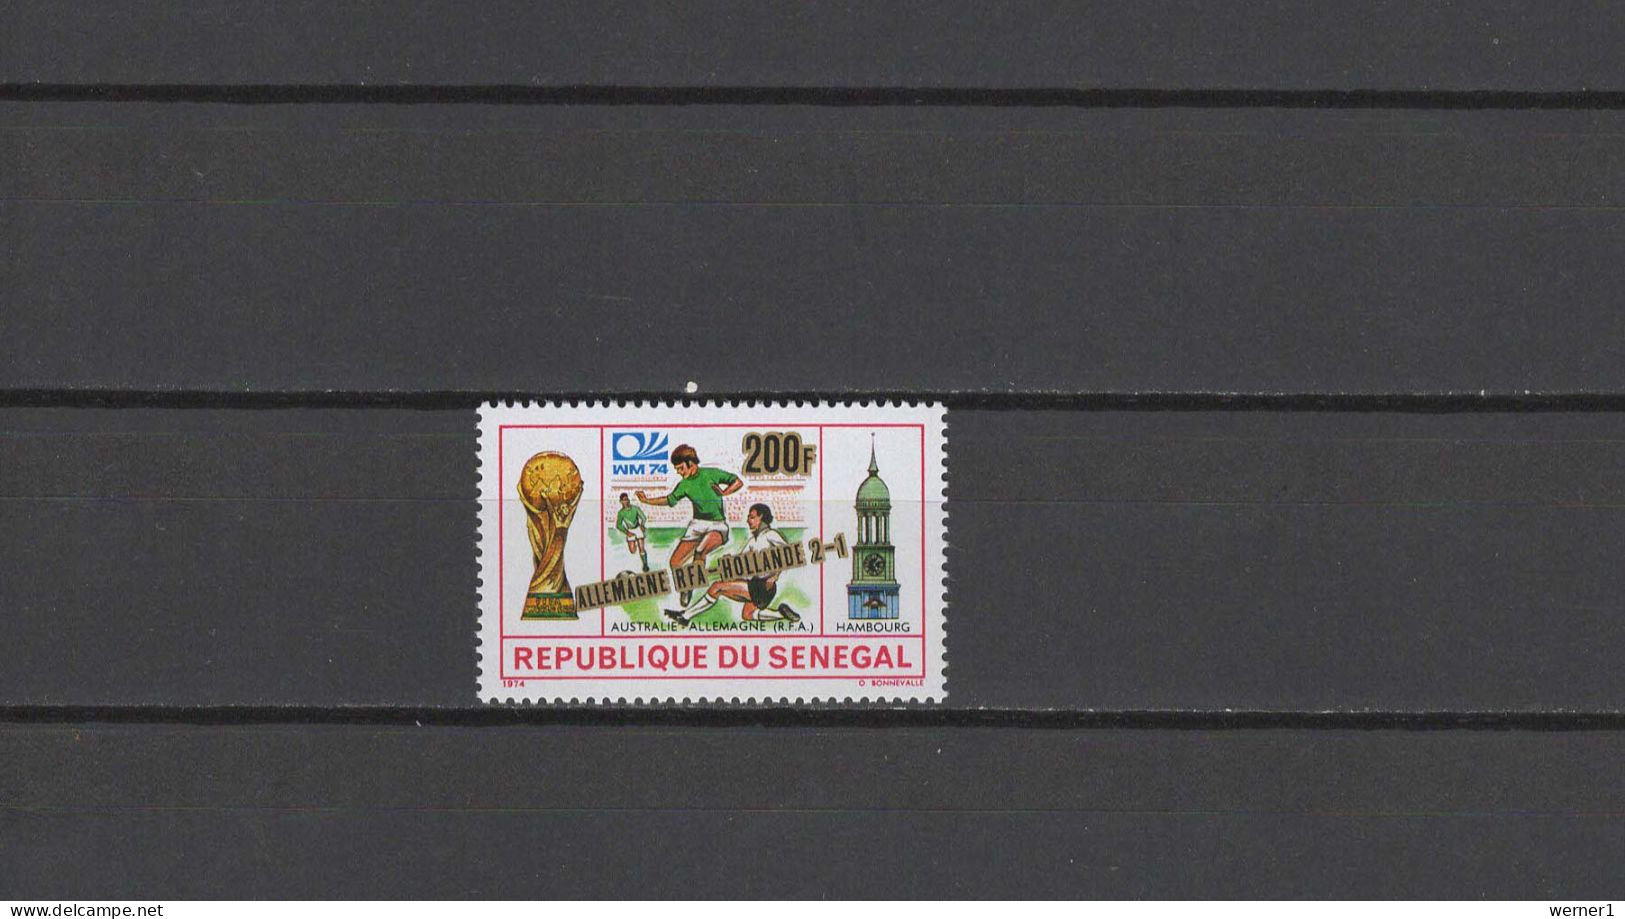 Senegal 1975 Football Soccer World Cup Stamp With Winner Overprint MNH - 1974 – West Germany